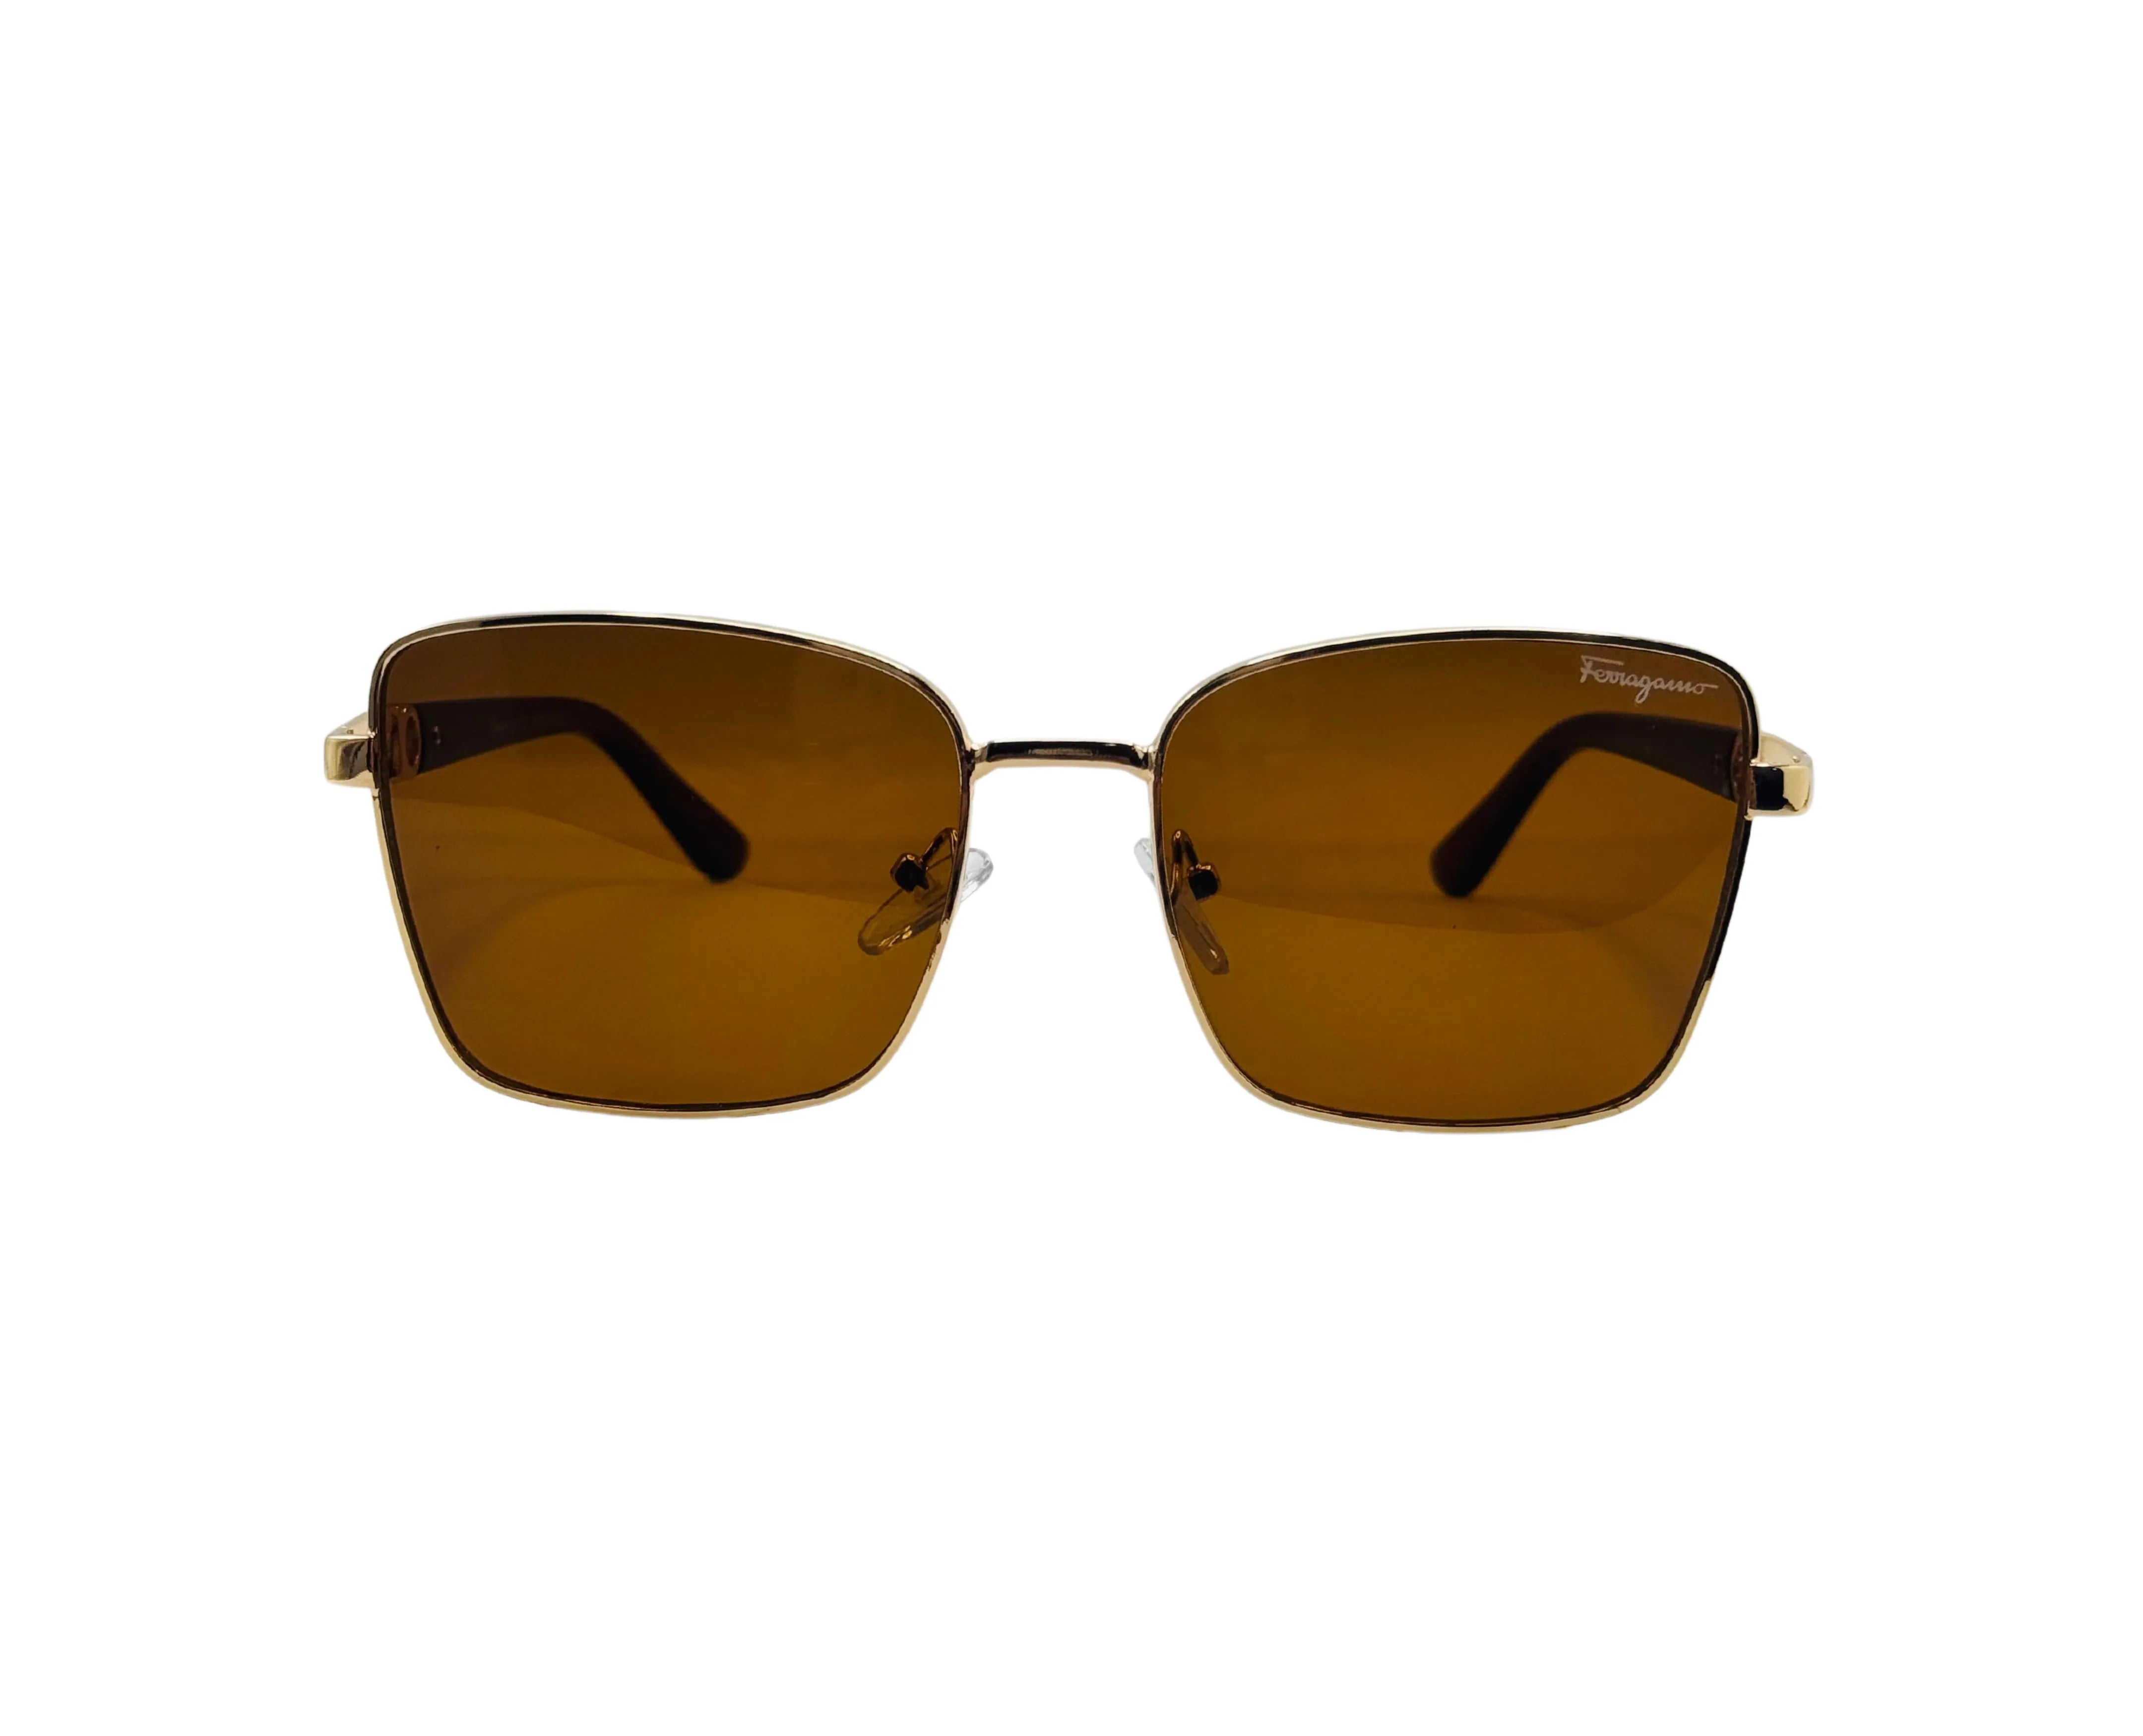 NS Deluxe - 373 - Brown - Sunglasses